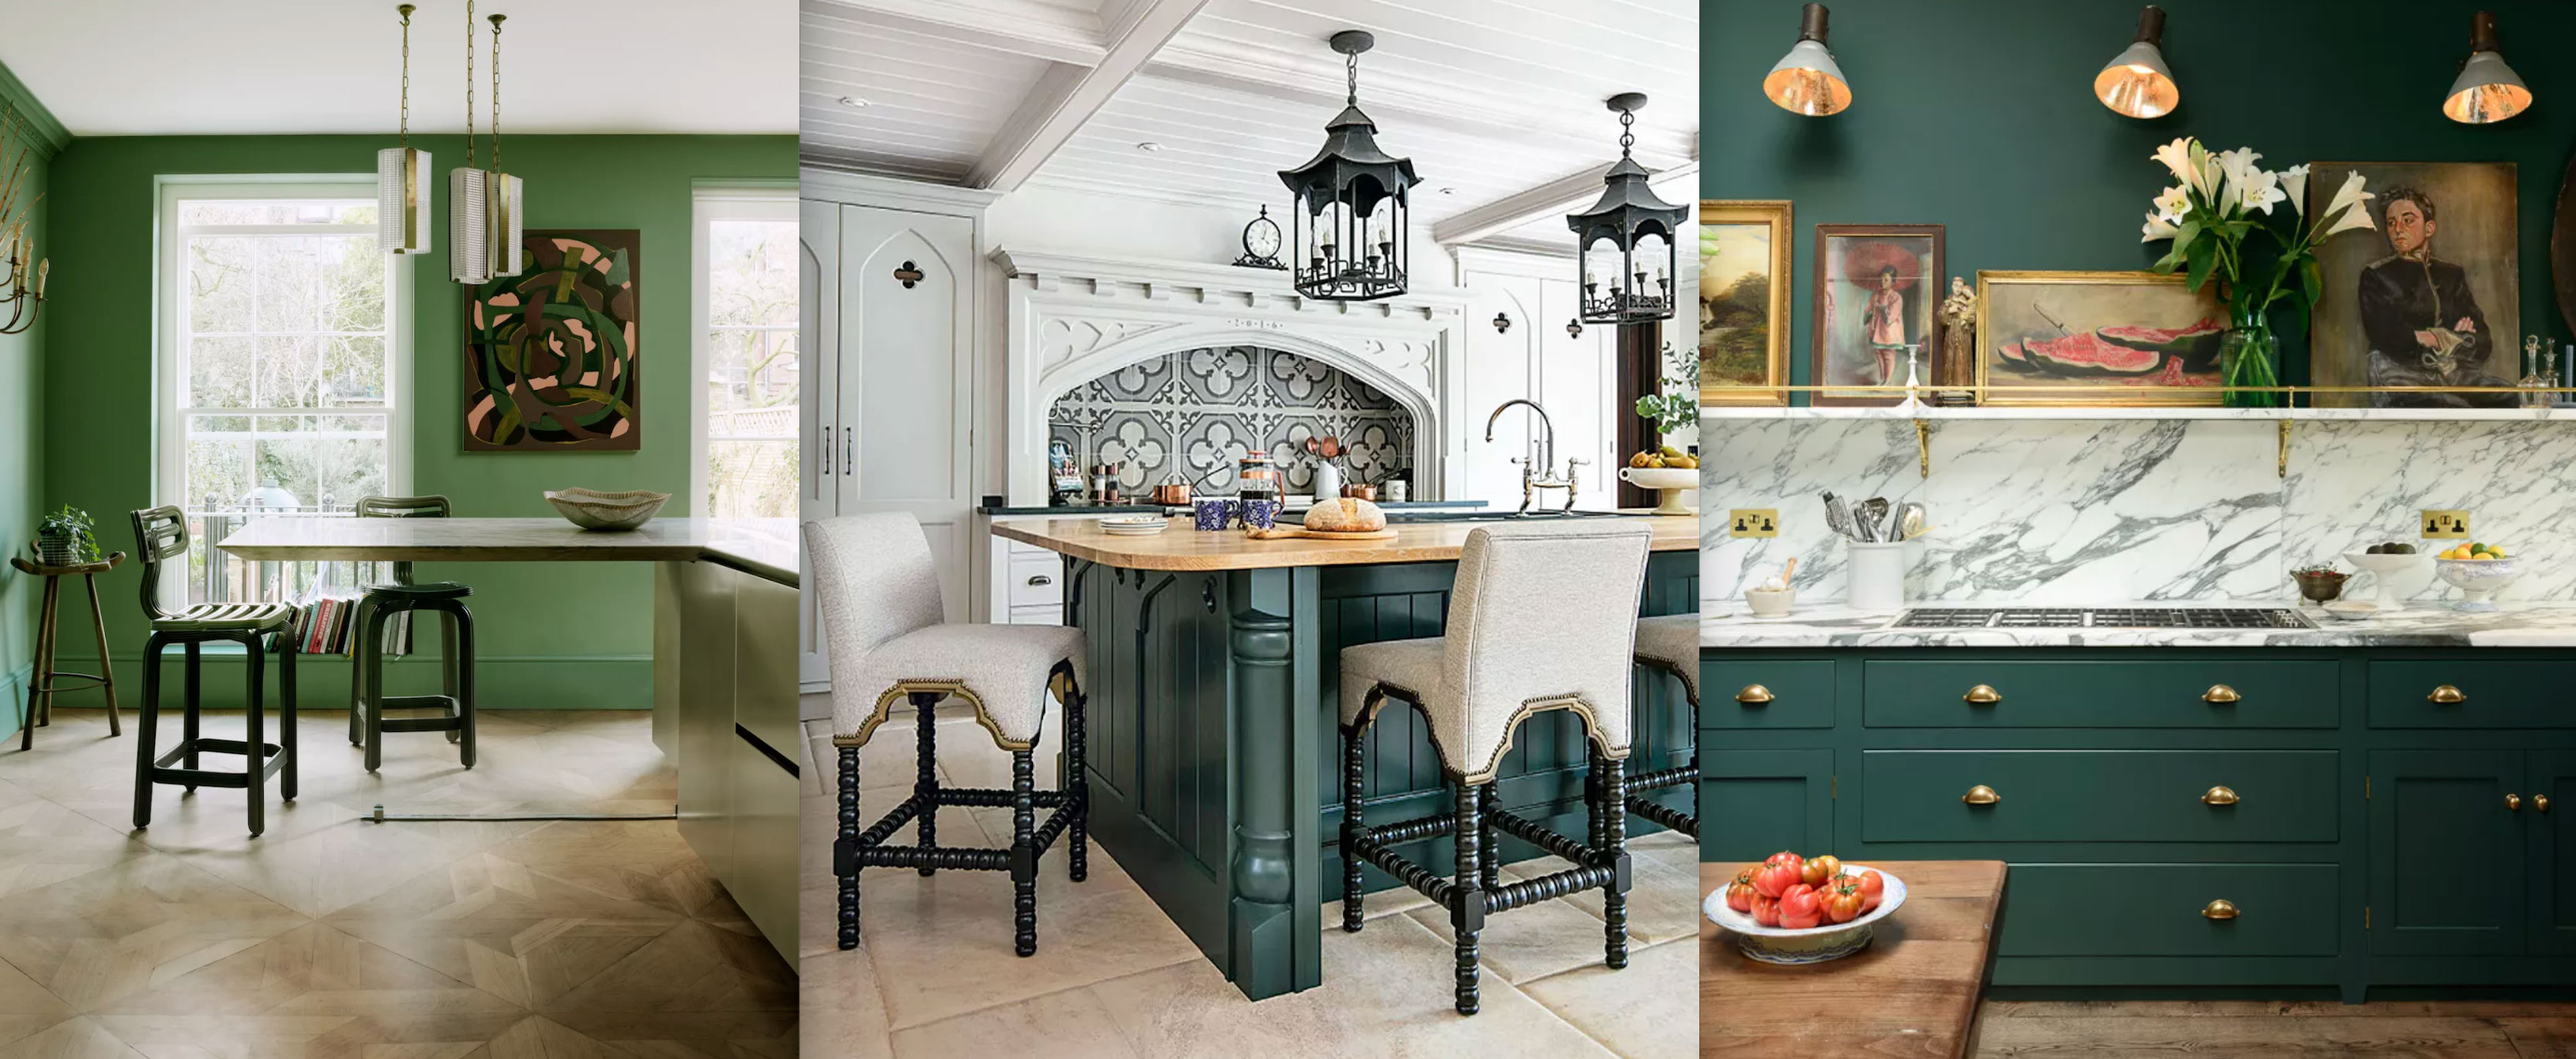 Green Kitchen Ideas 16 Kitchens In Sage Olive And Apple Homes Gardens